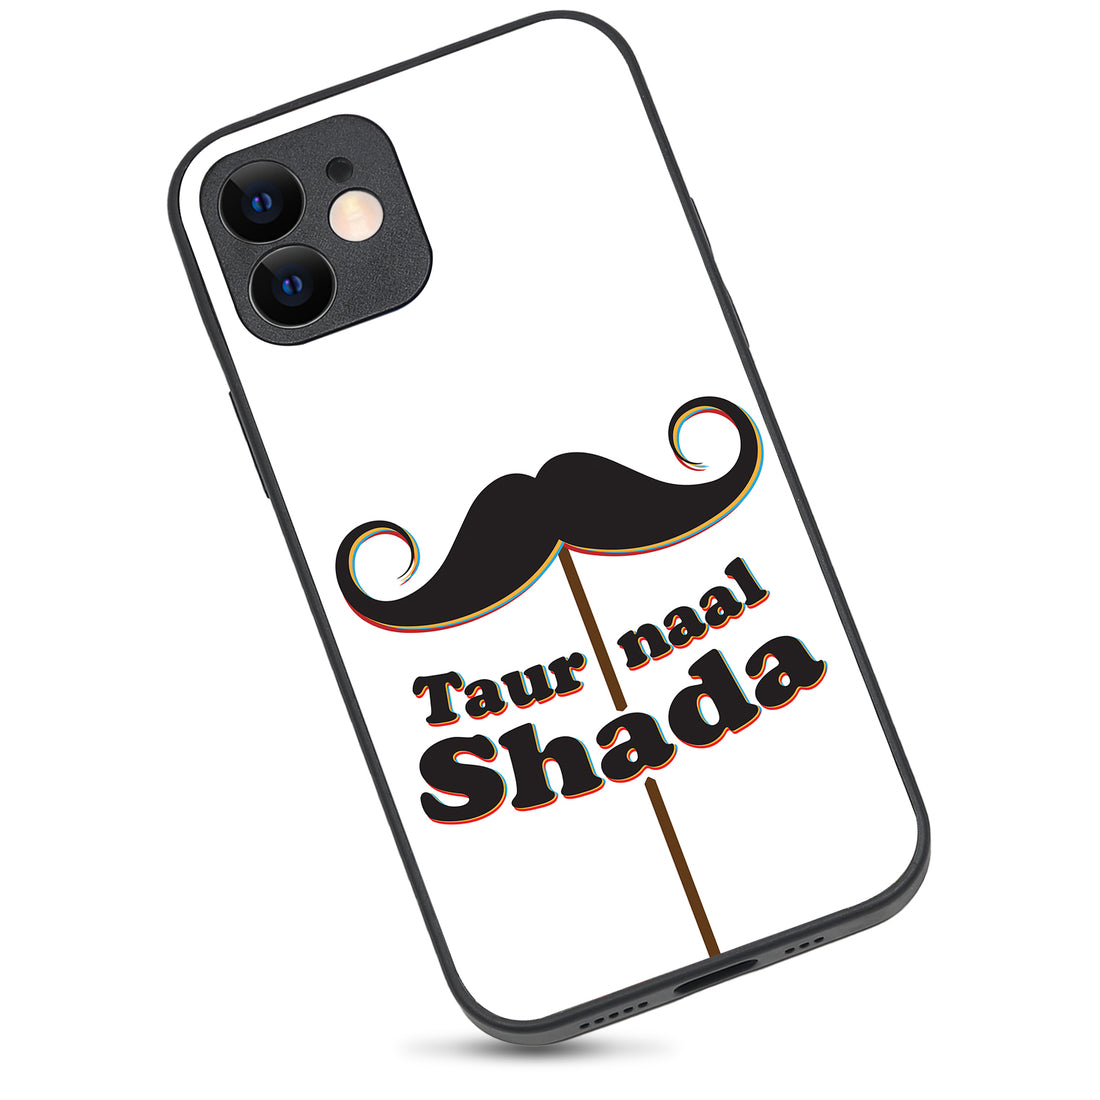 Taur Naal Shada Motivational Quotes iPhone 12 Case